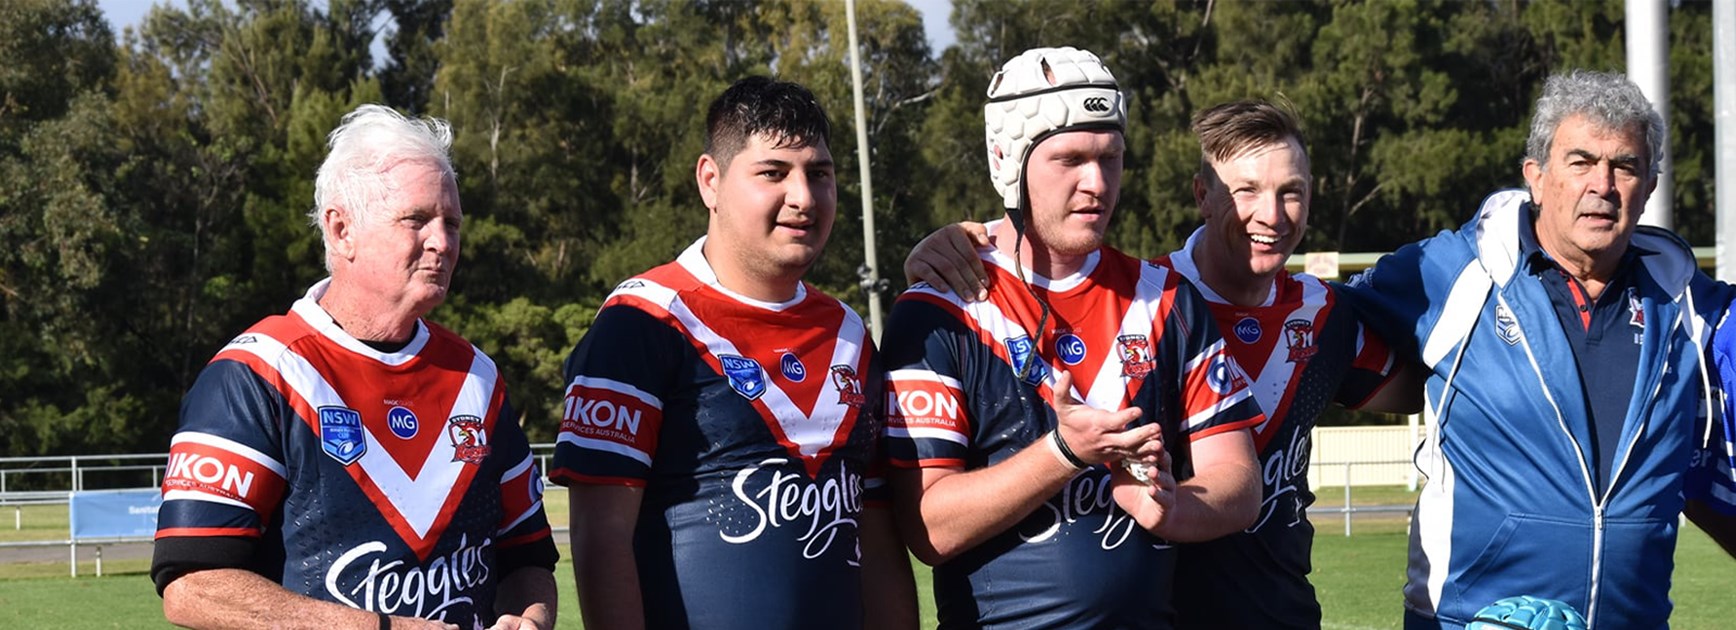 "Inspirational": The Roosters Team Playing for the Love of the Game